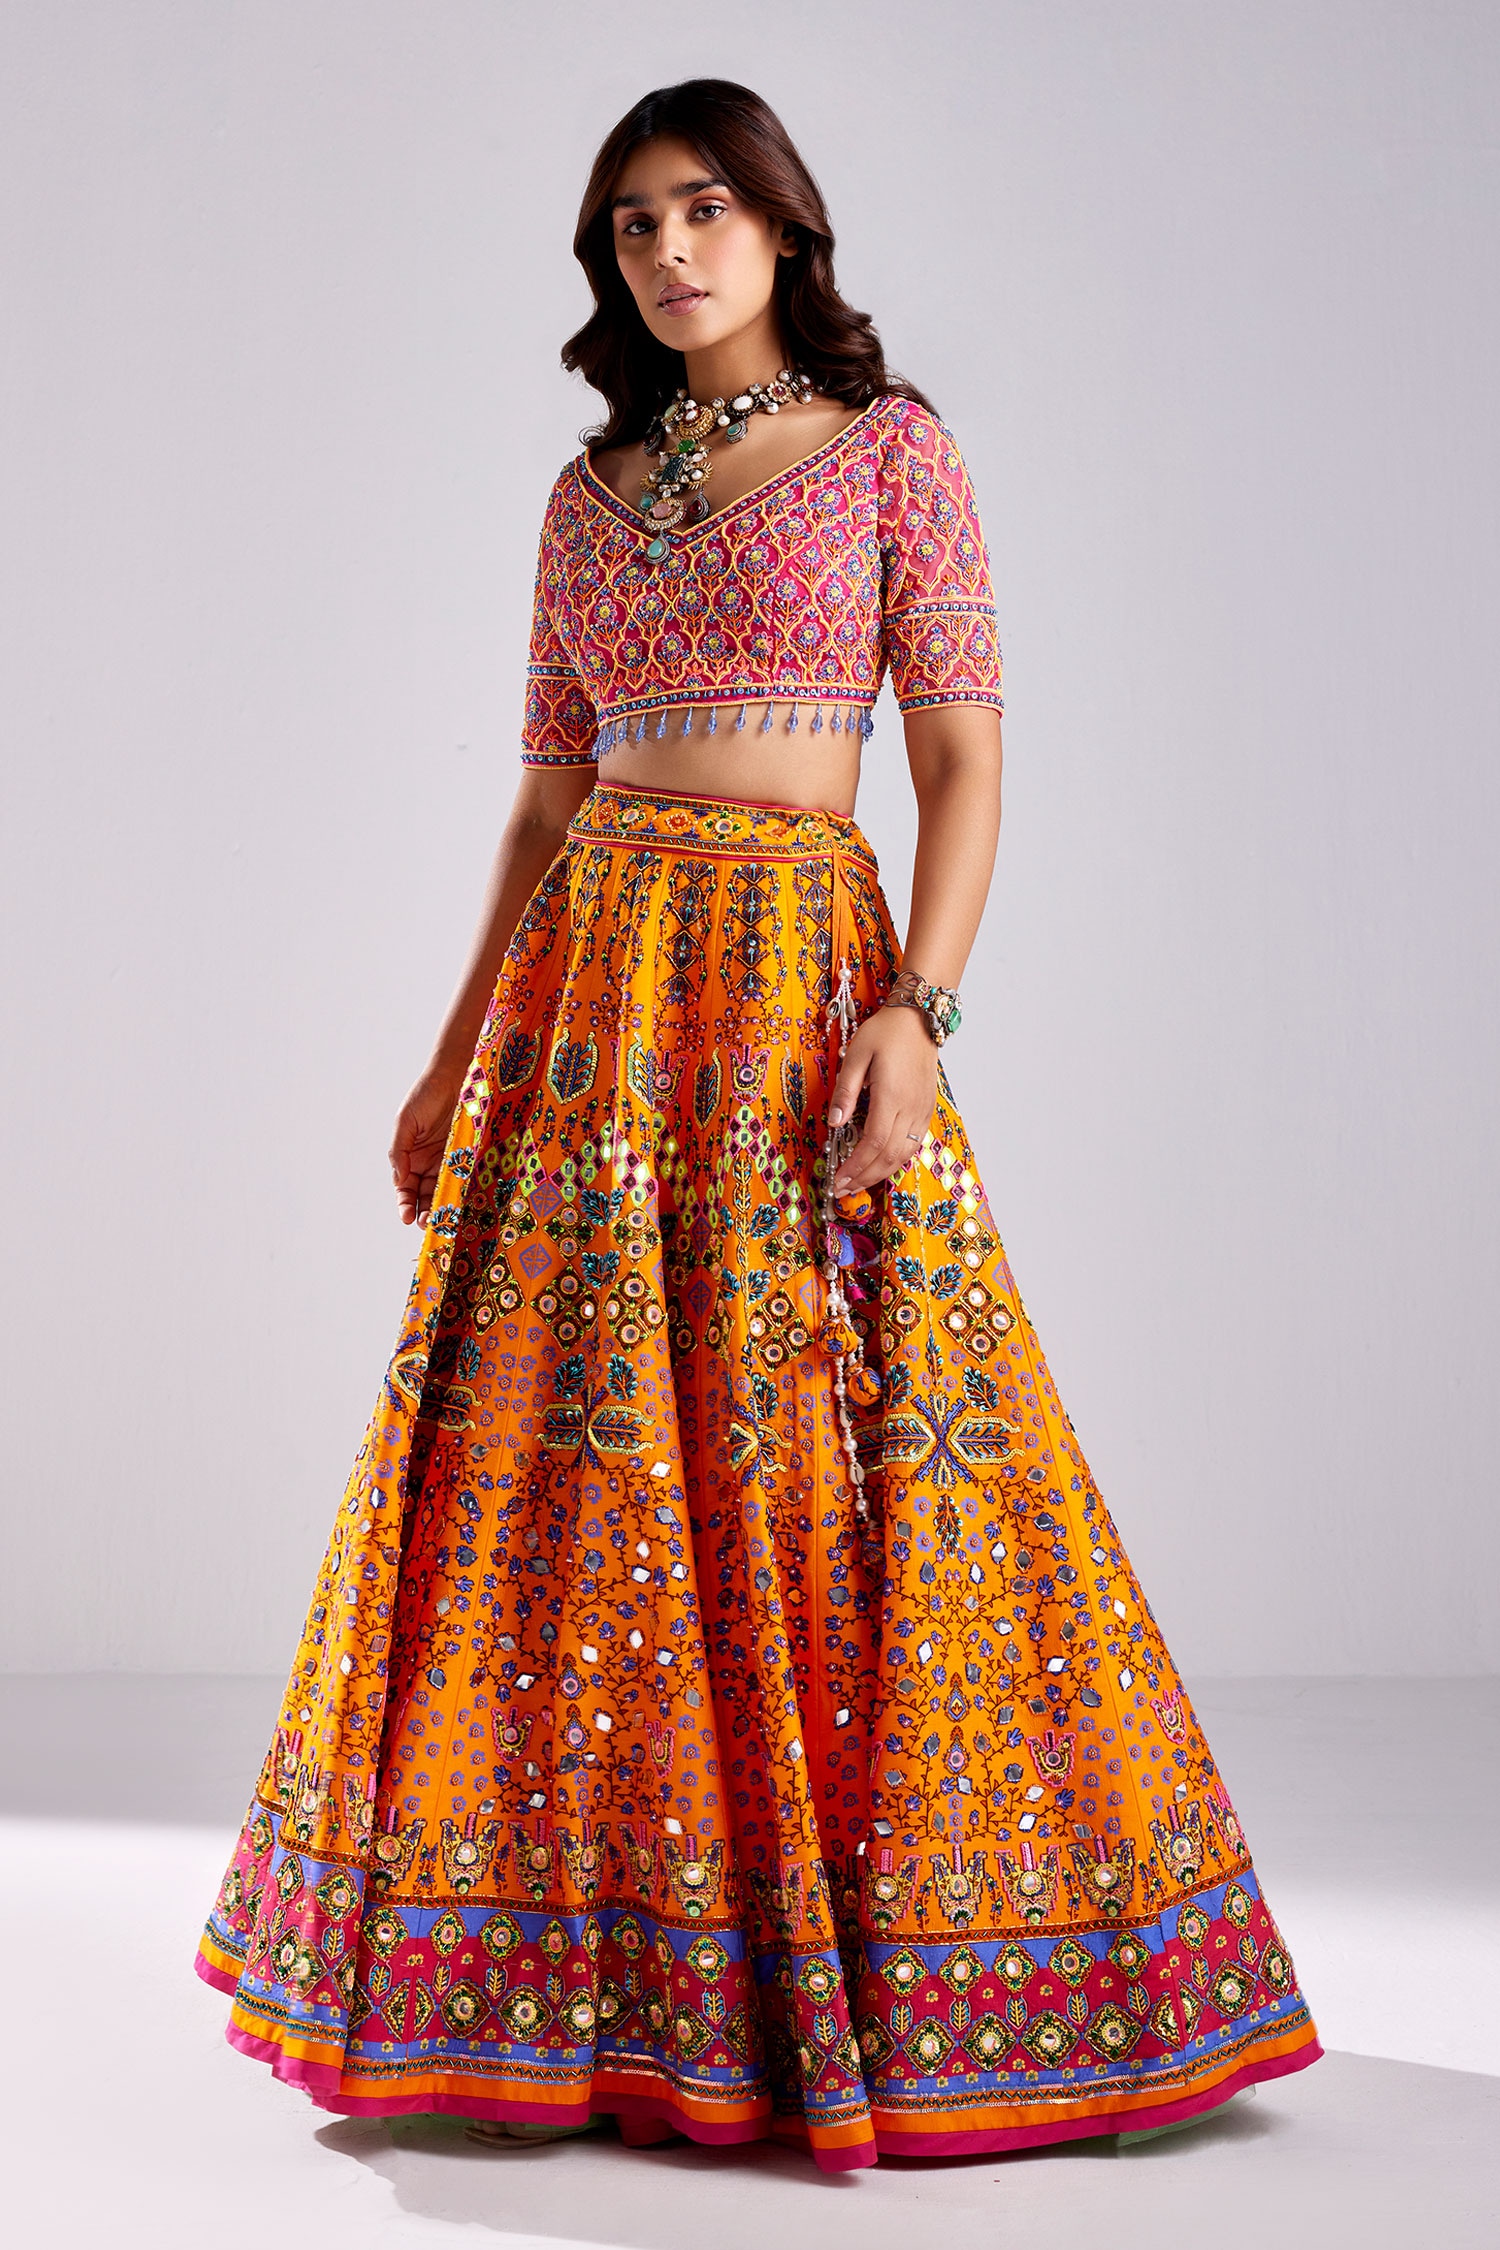 What color of the blouse is suitable for orange lehenga? - Quora